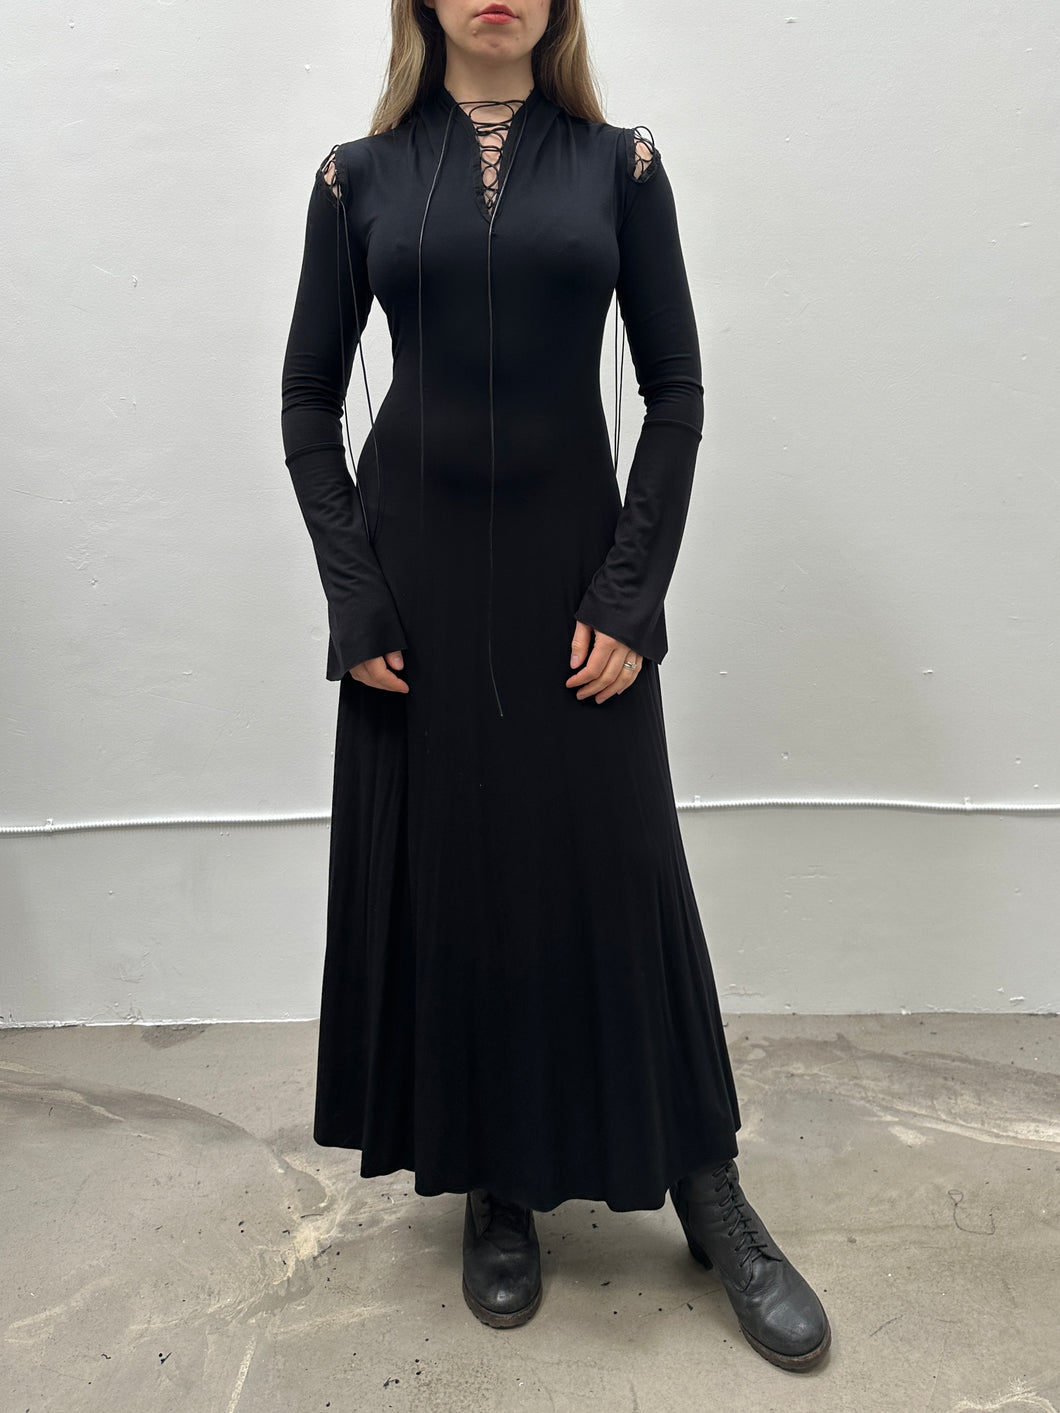 Sample Sale: Triple Laced Maxi Dress (Size I, up to 38